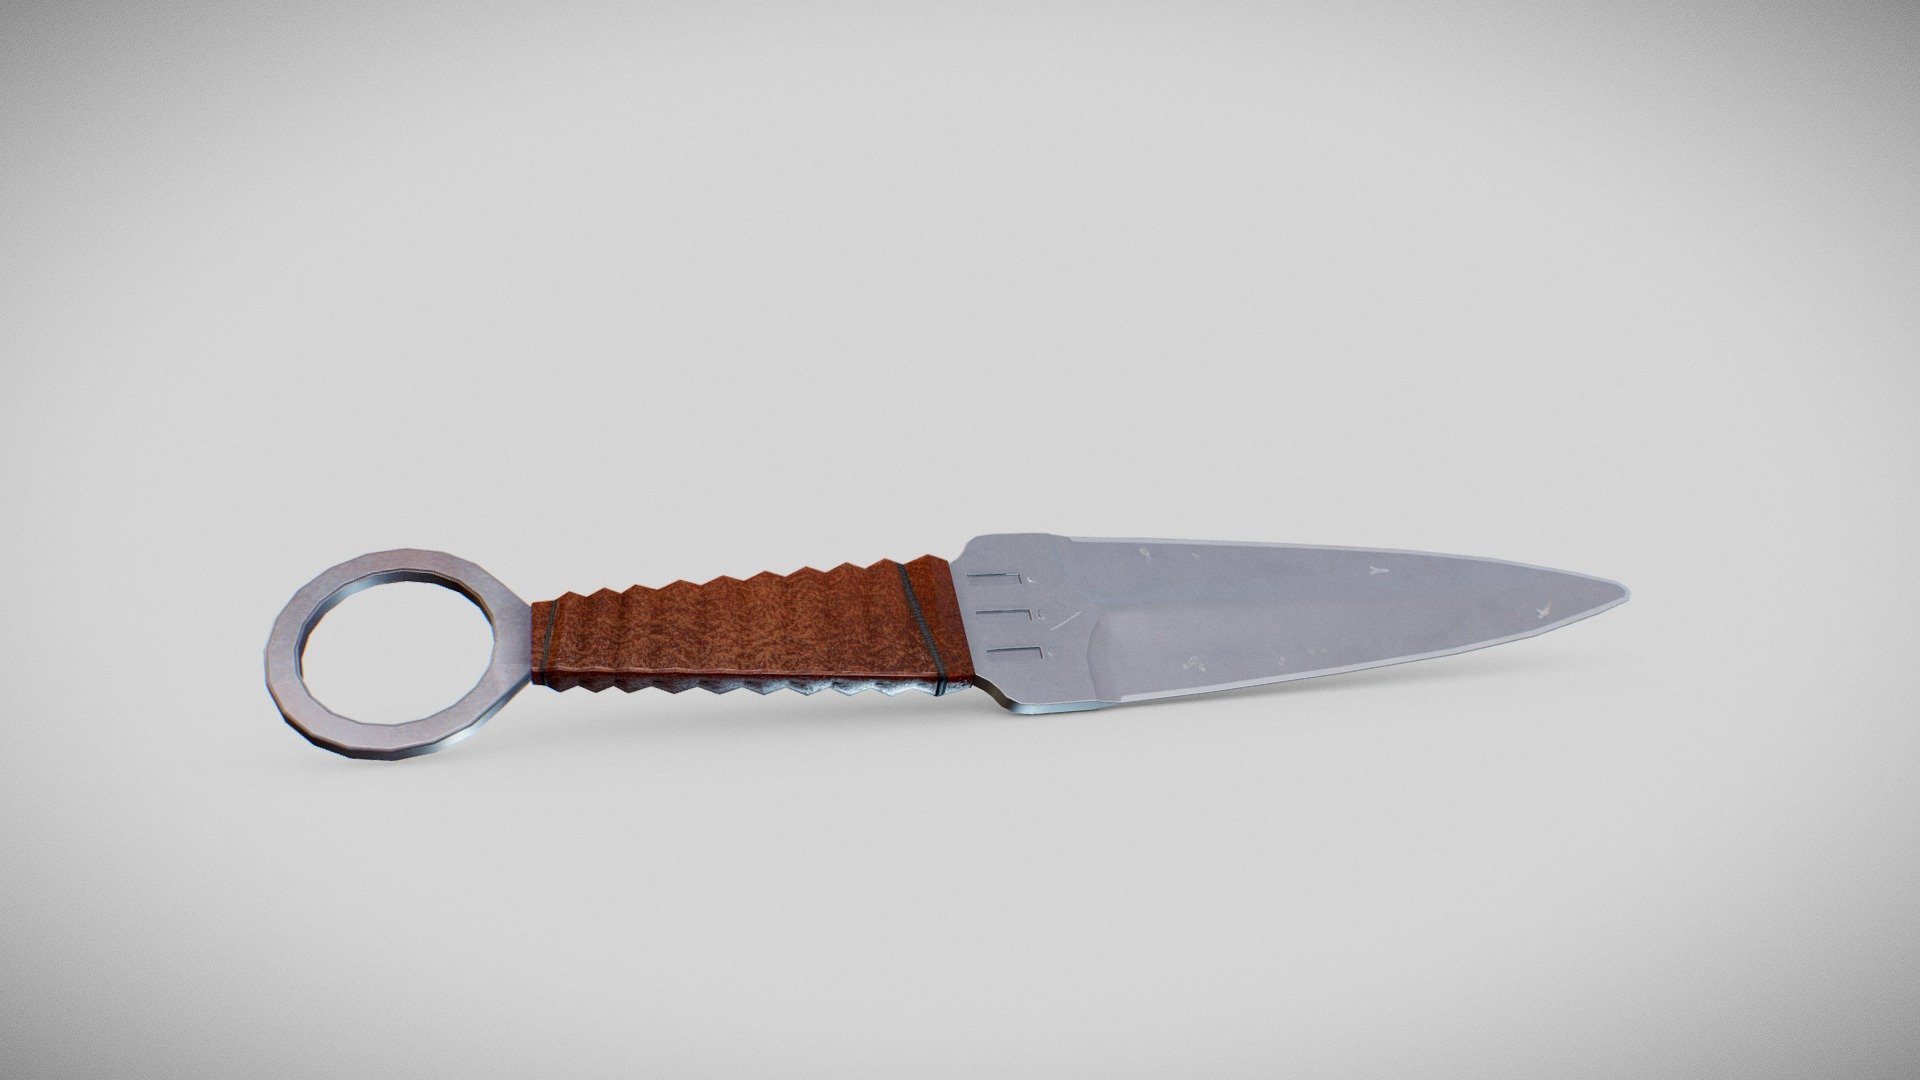 Throwing Knife Download Free 3d Model By Michele Passerino Michele Passerino 30e088c - how to throw a knife in roblox